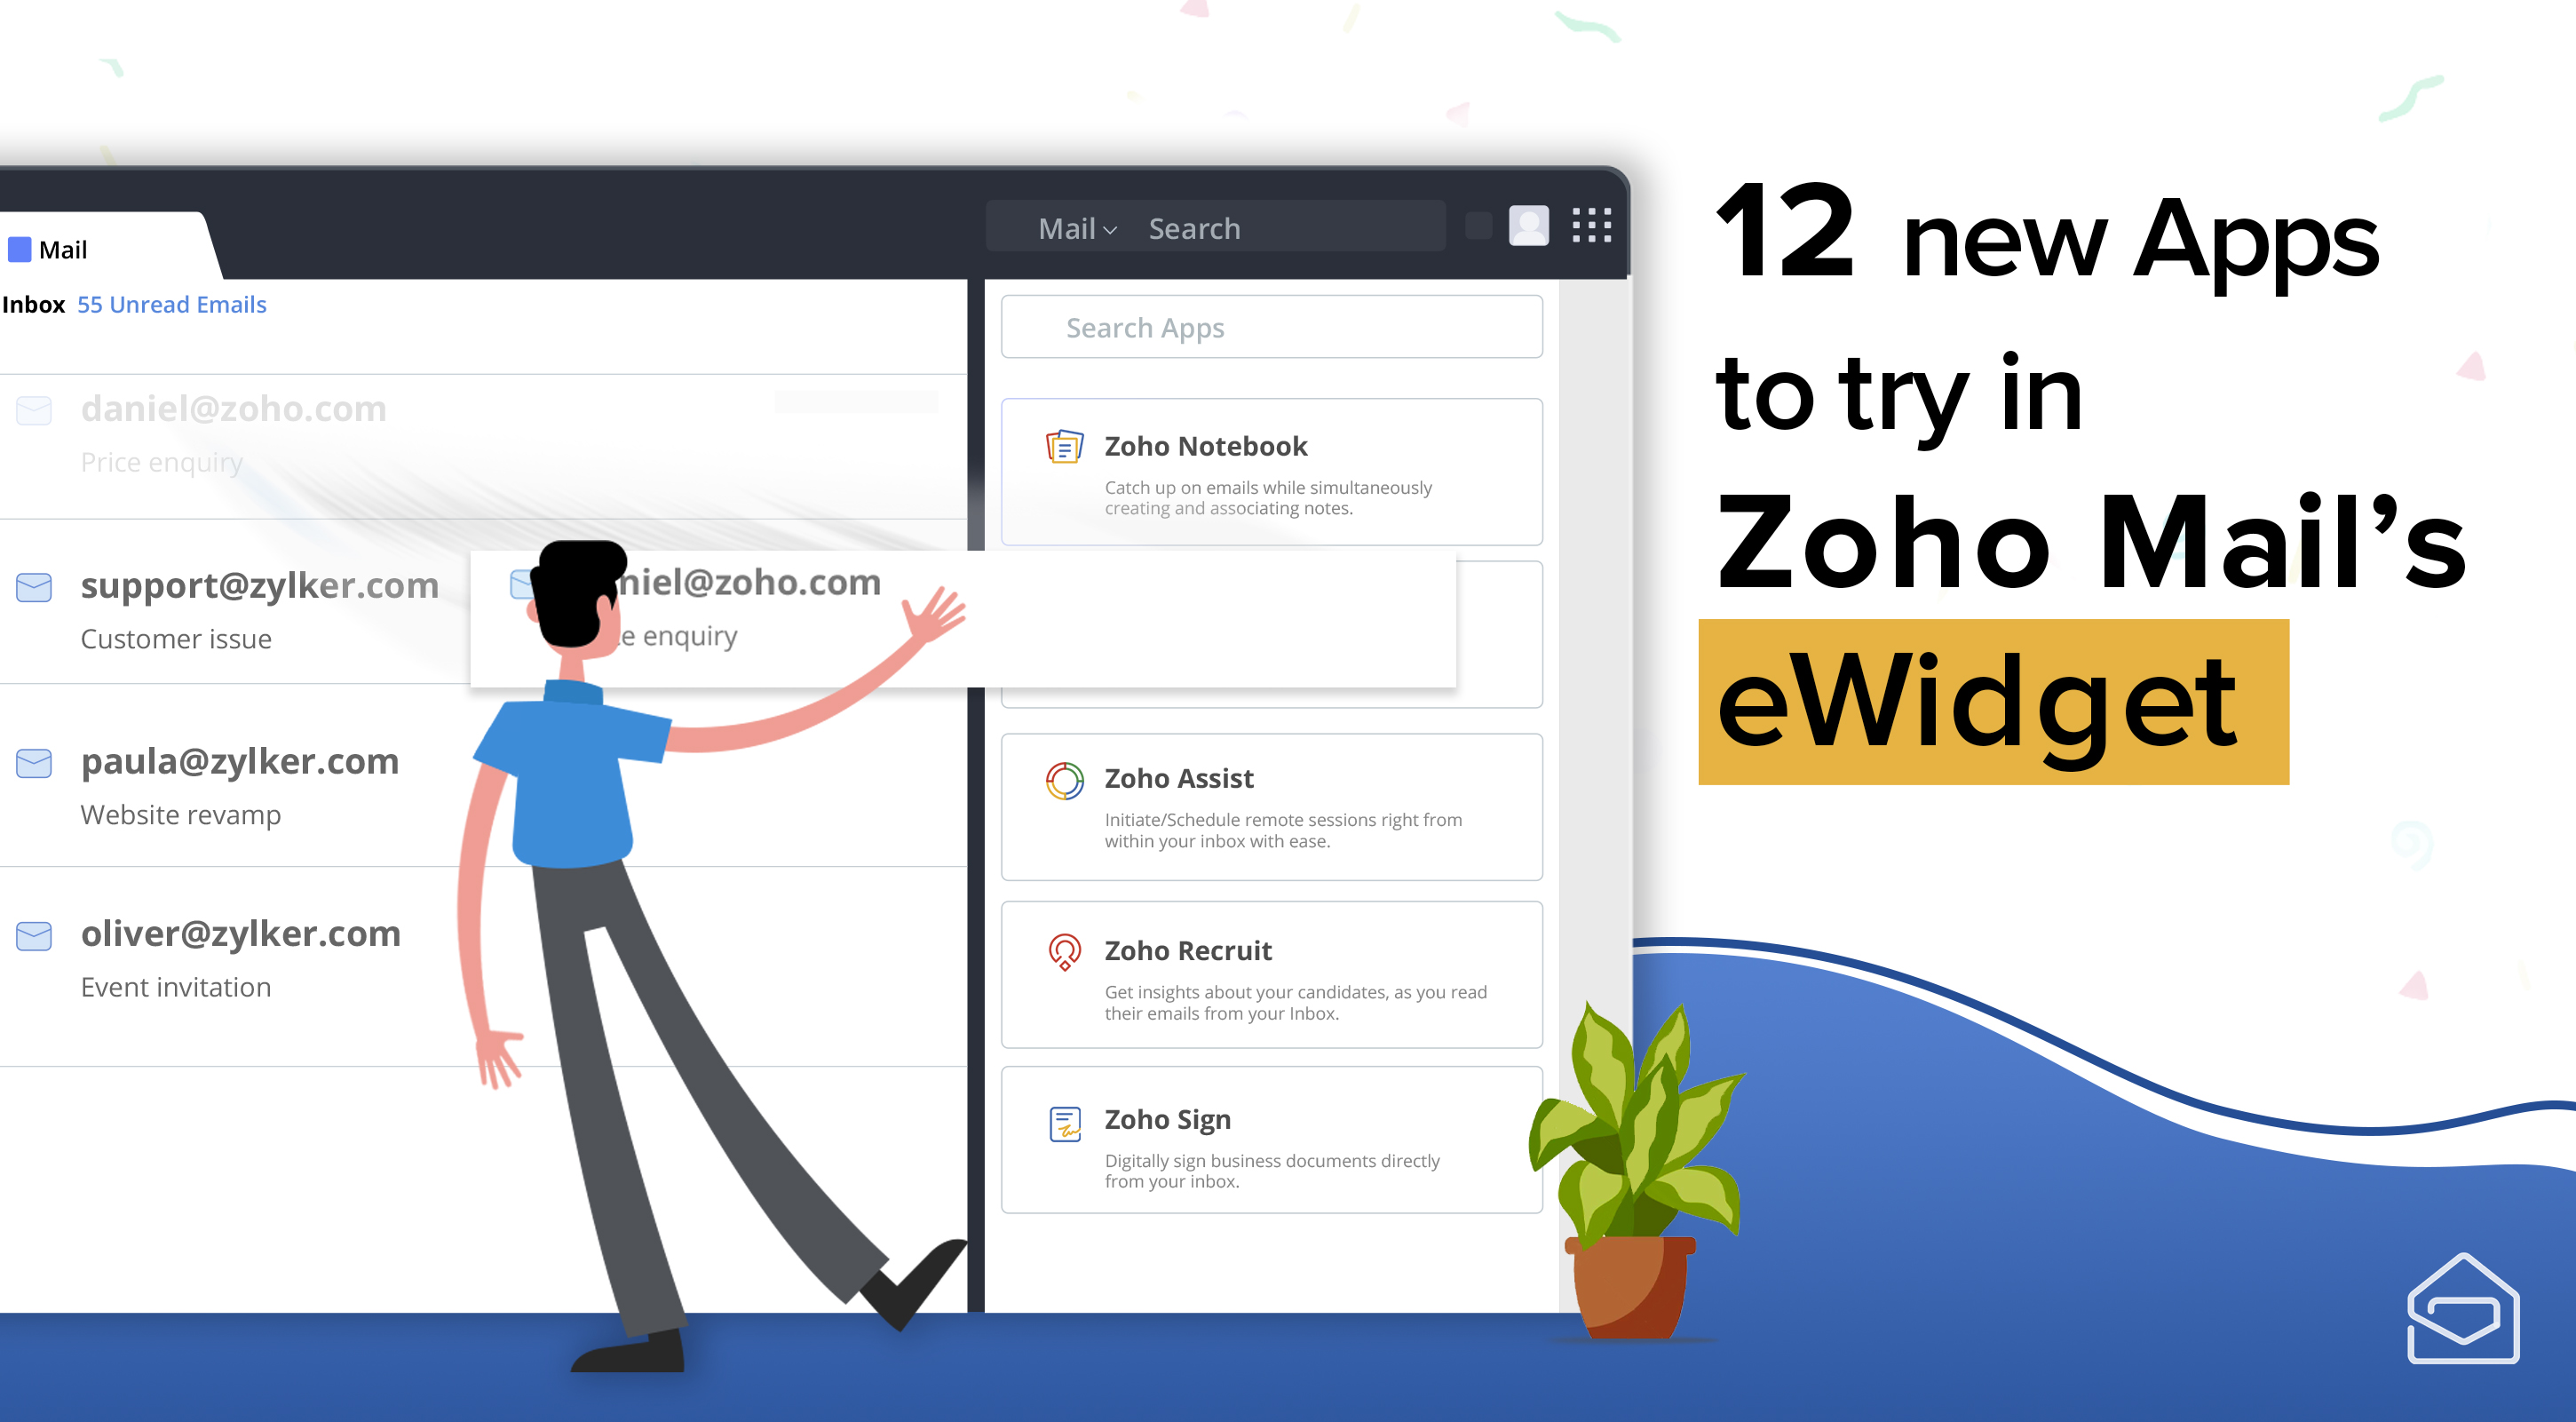 12 new apps to try in Zoho Mail's eWidget